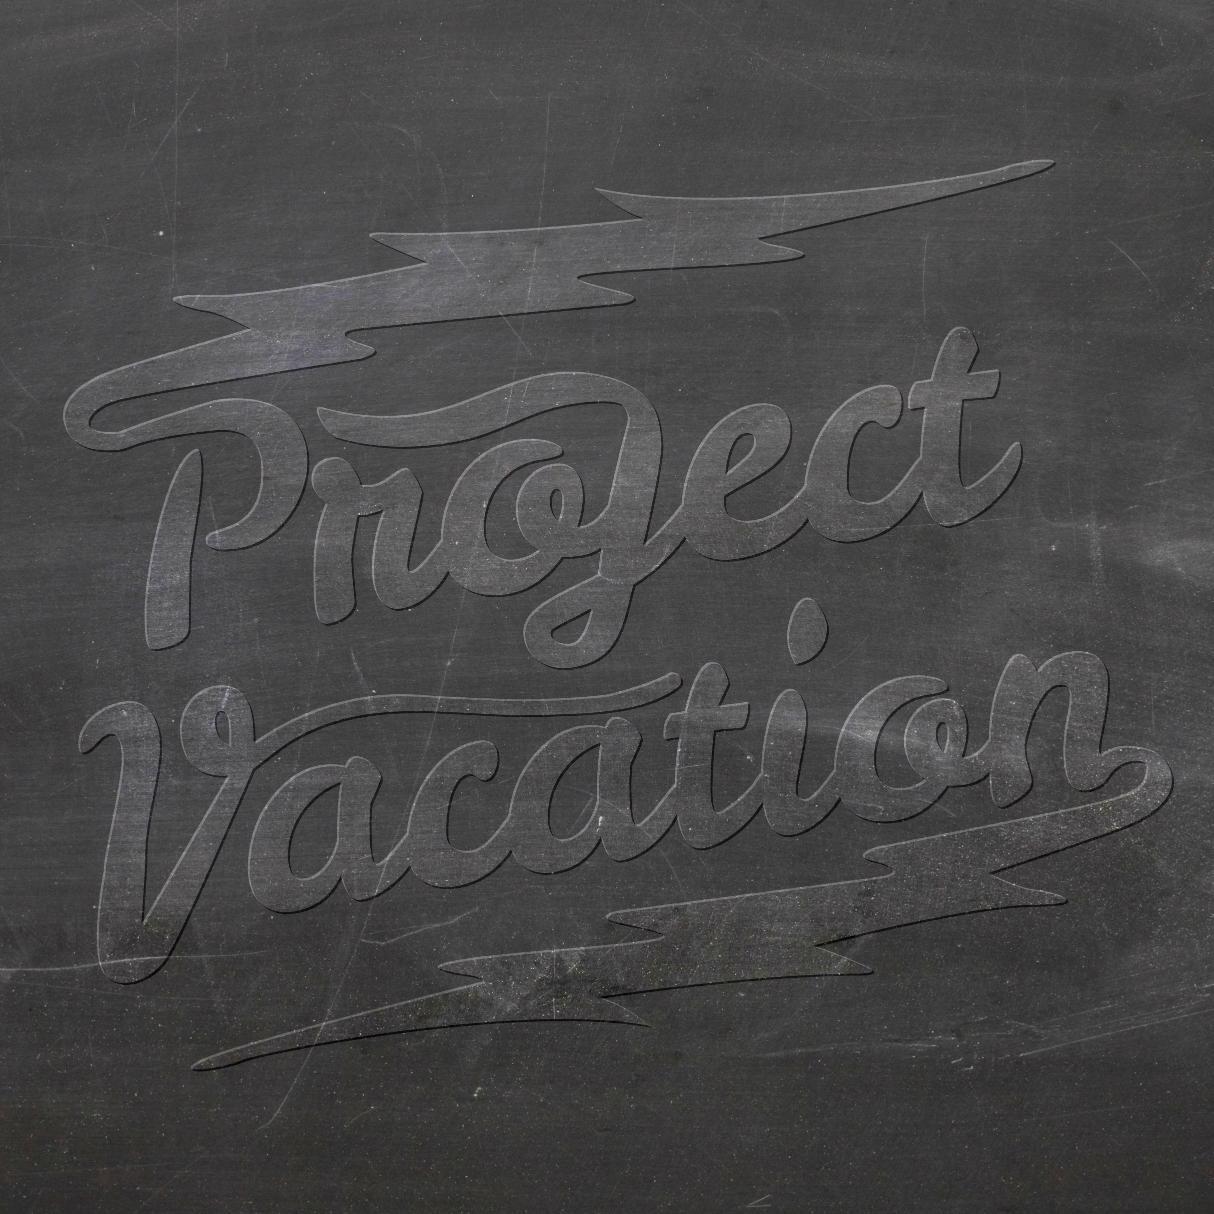 Your ultimate travel sharepoint. Share your travel photos to get connected with all
People:@thepvstuff 
FB: projectvacation.
#projectvacation #pvstuff